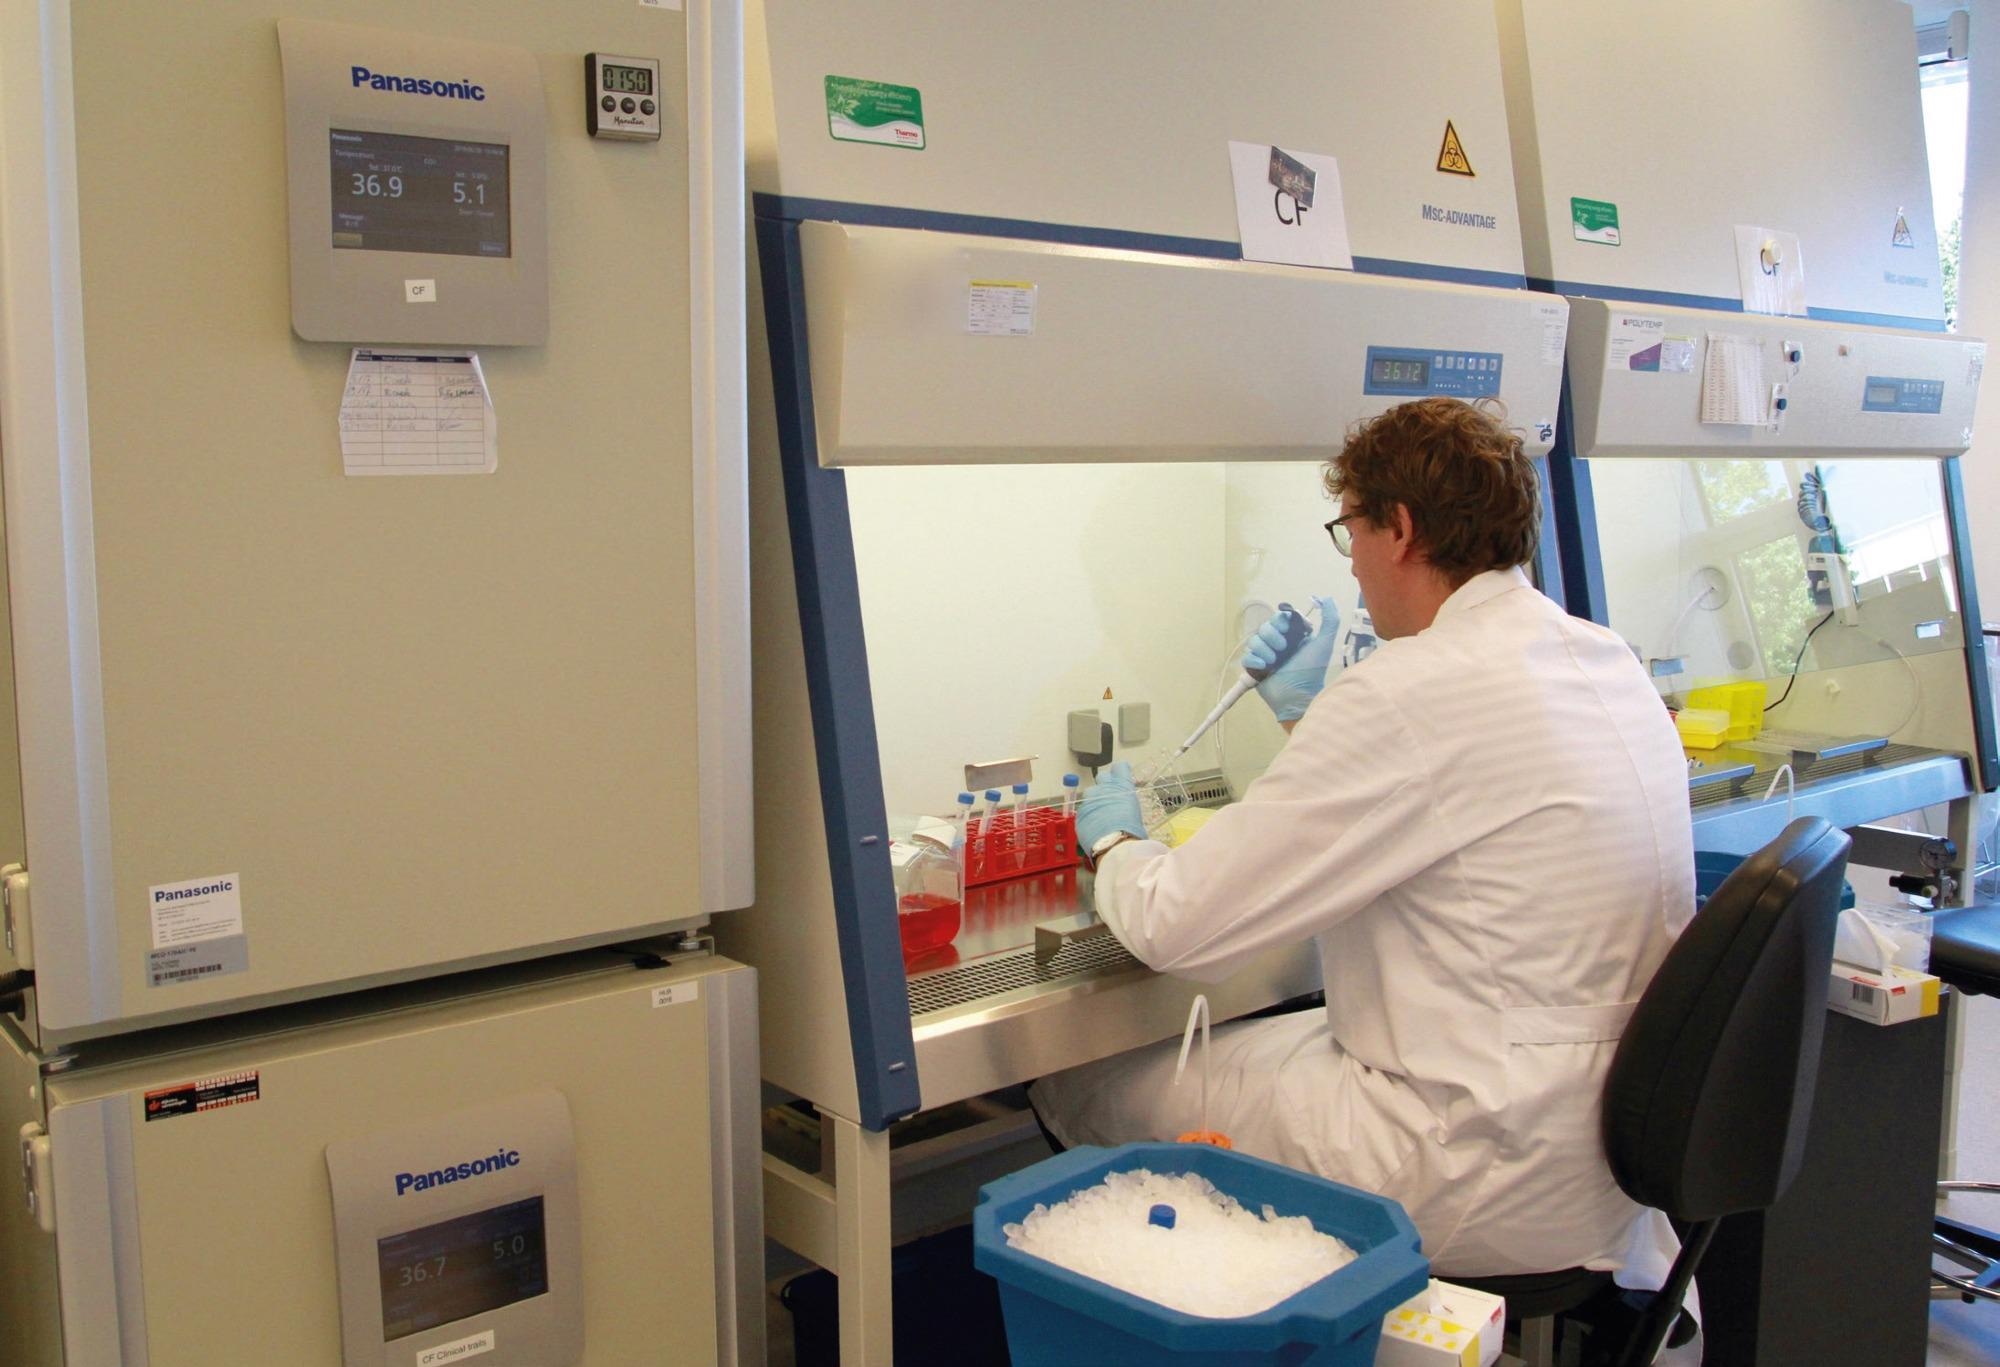 The laboratories for tissue cultivation are organisationally divided across three departments: oncology, CF and other illnesses, and screening.